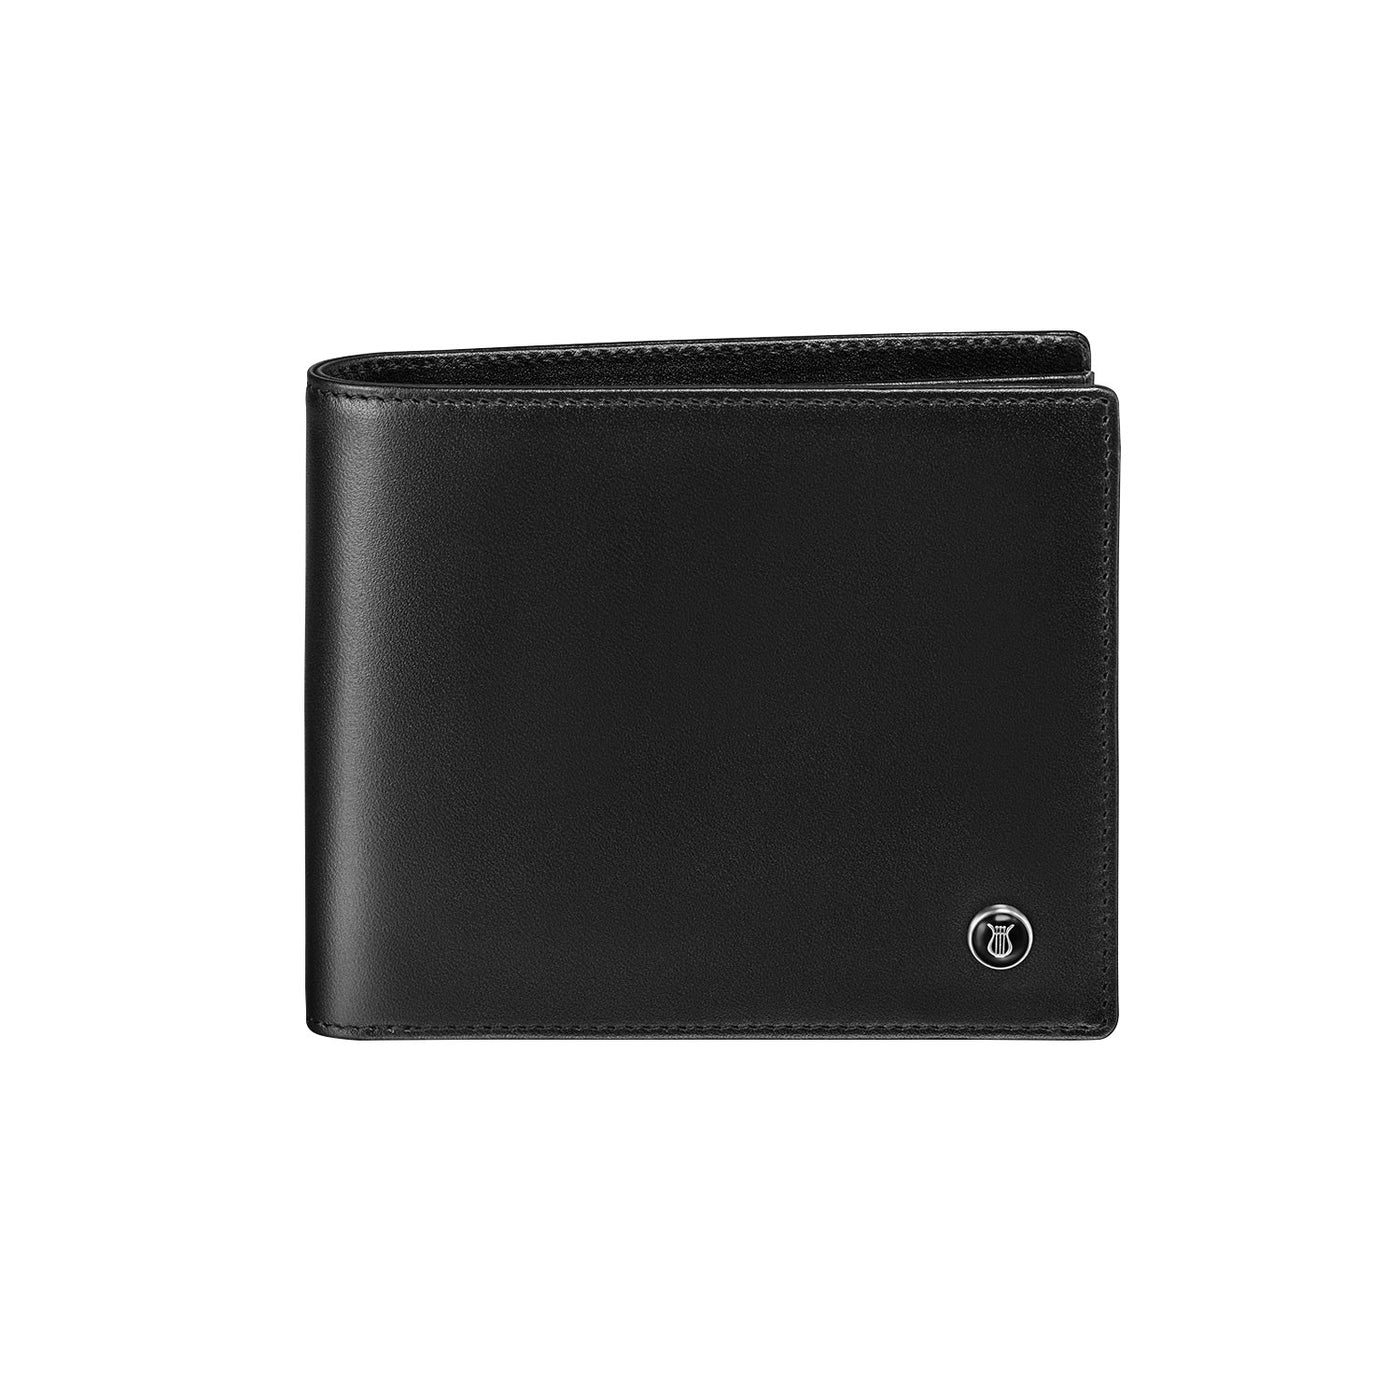 Lapis Bard Mayfair Bifold 6cc Wallet with Additional Sleeve - Black